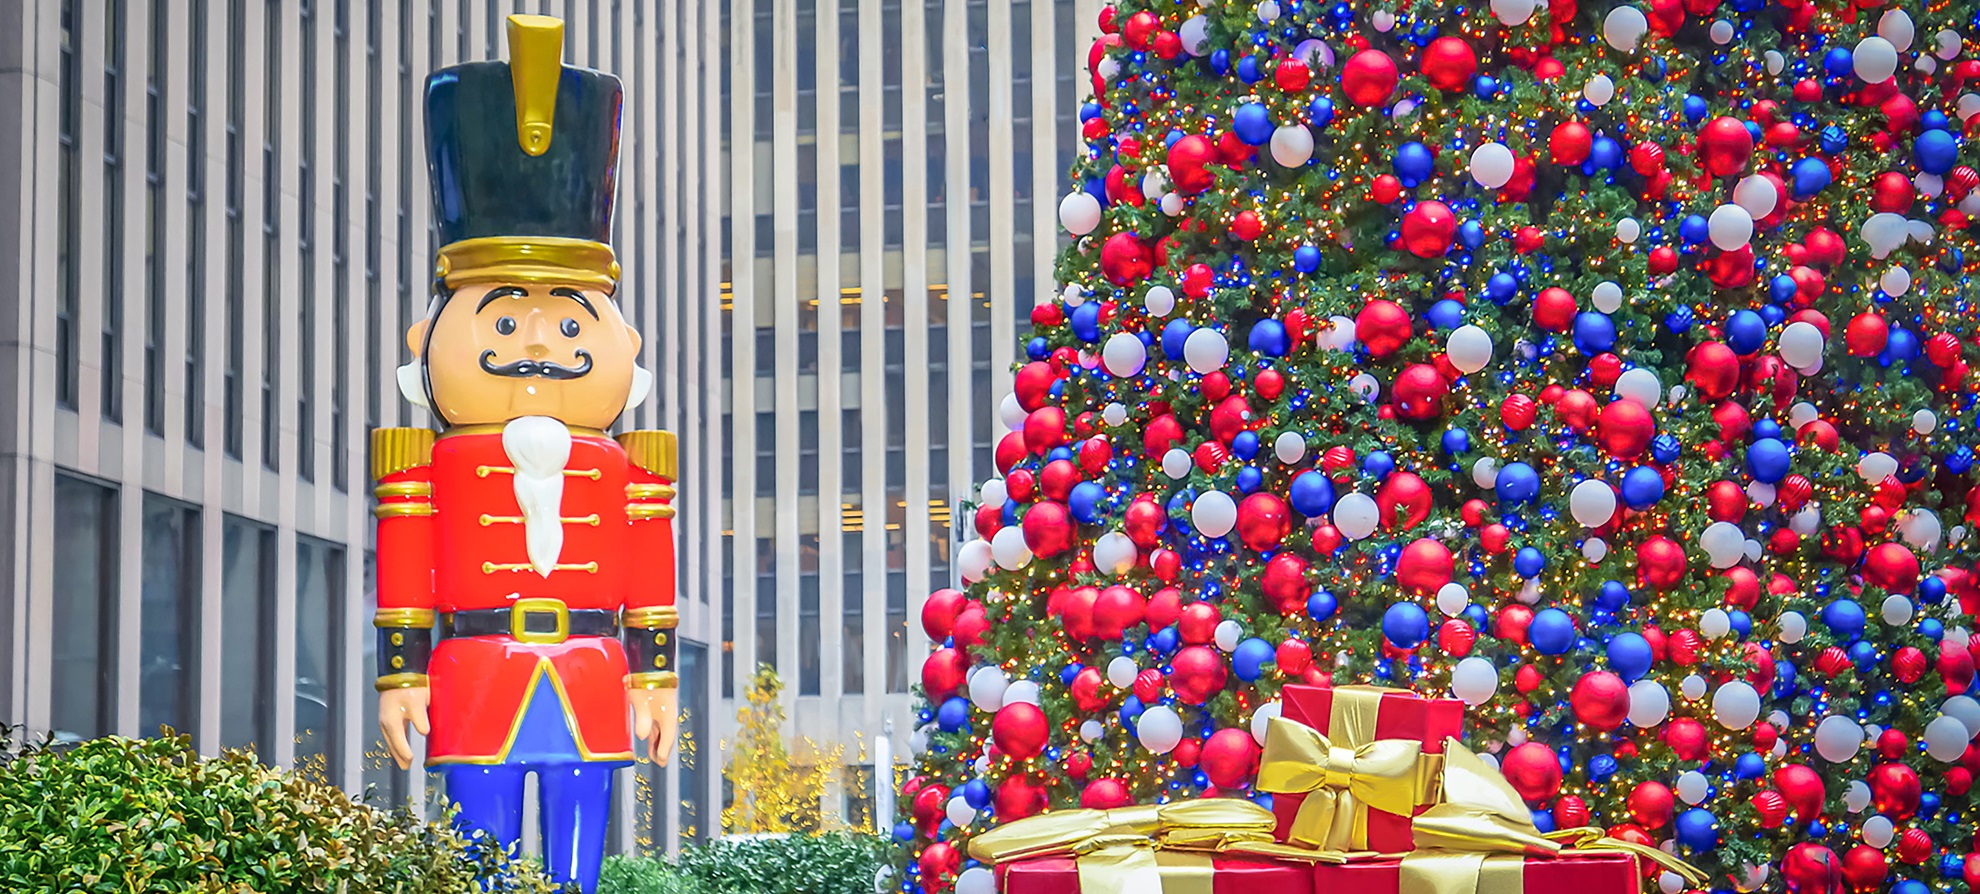 Toy Soldier next to christmas tree